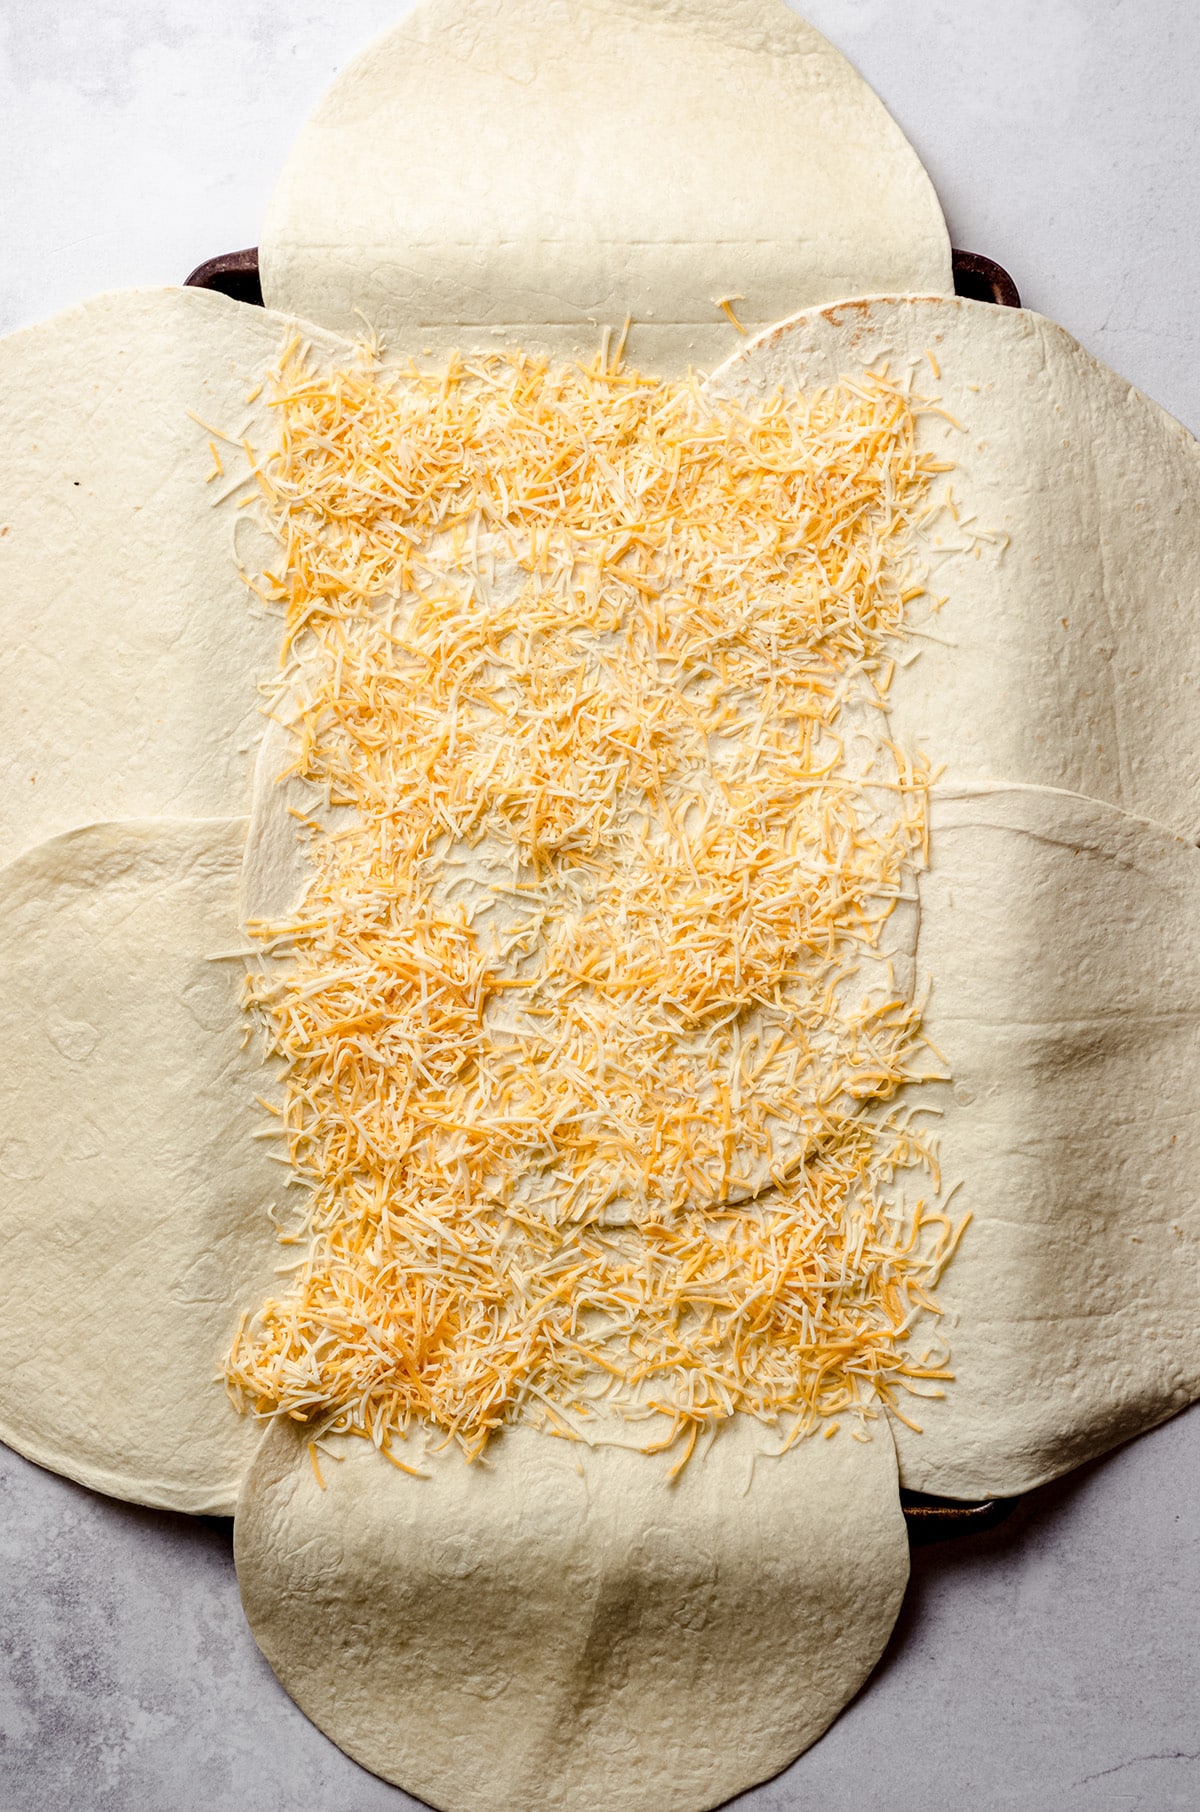 Adding shredded cheese to a sheet pan layered with tortillas.